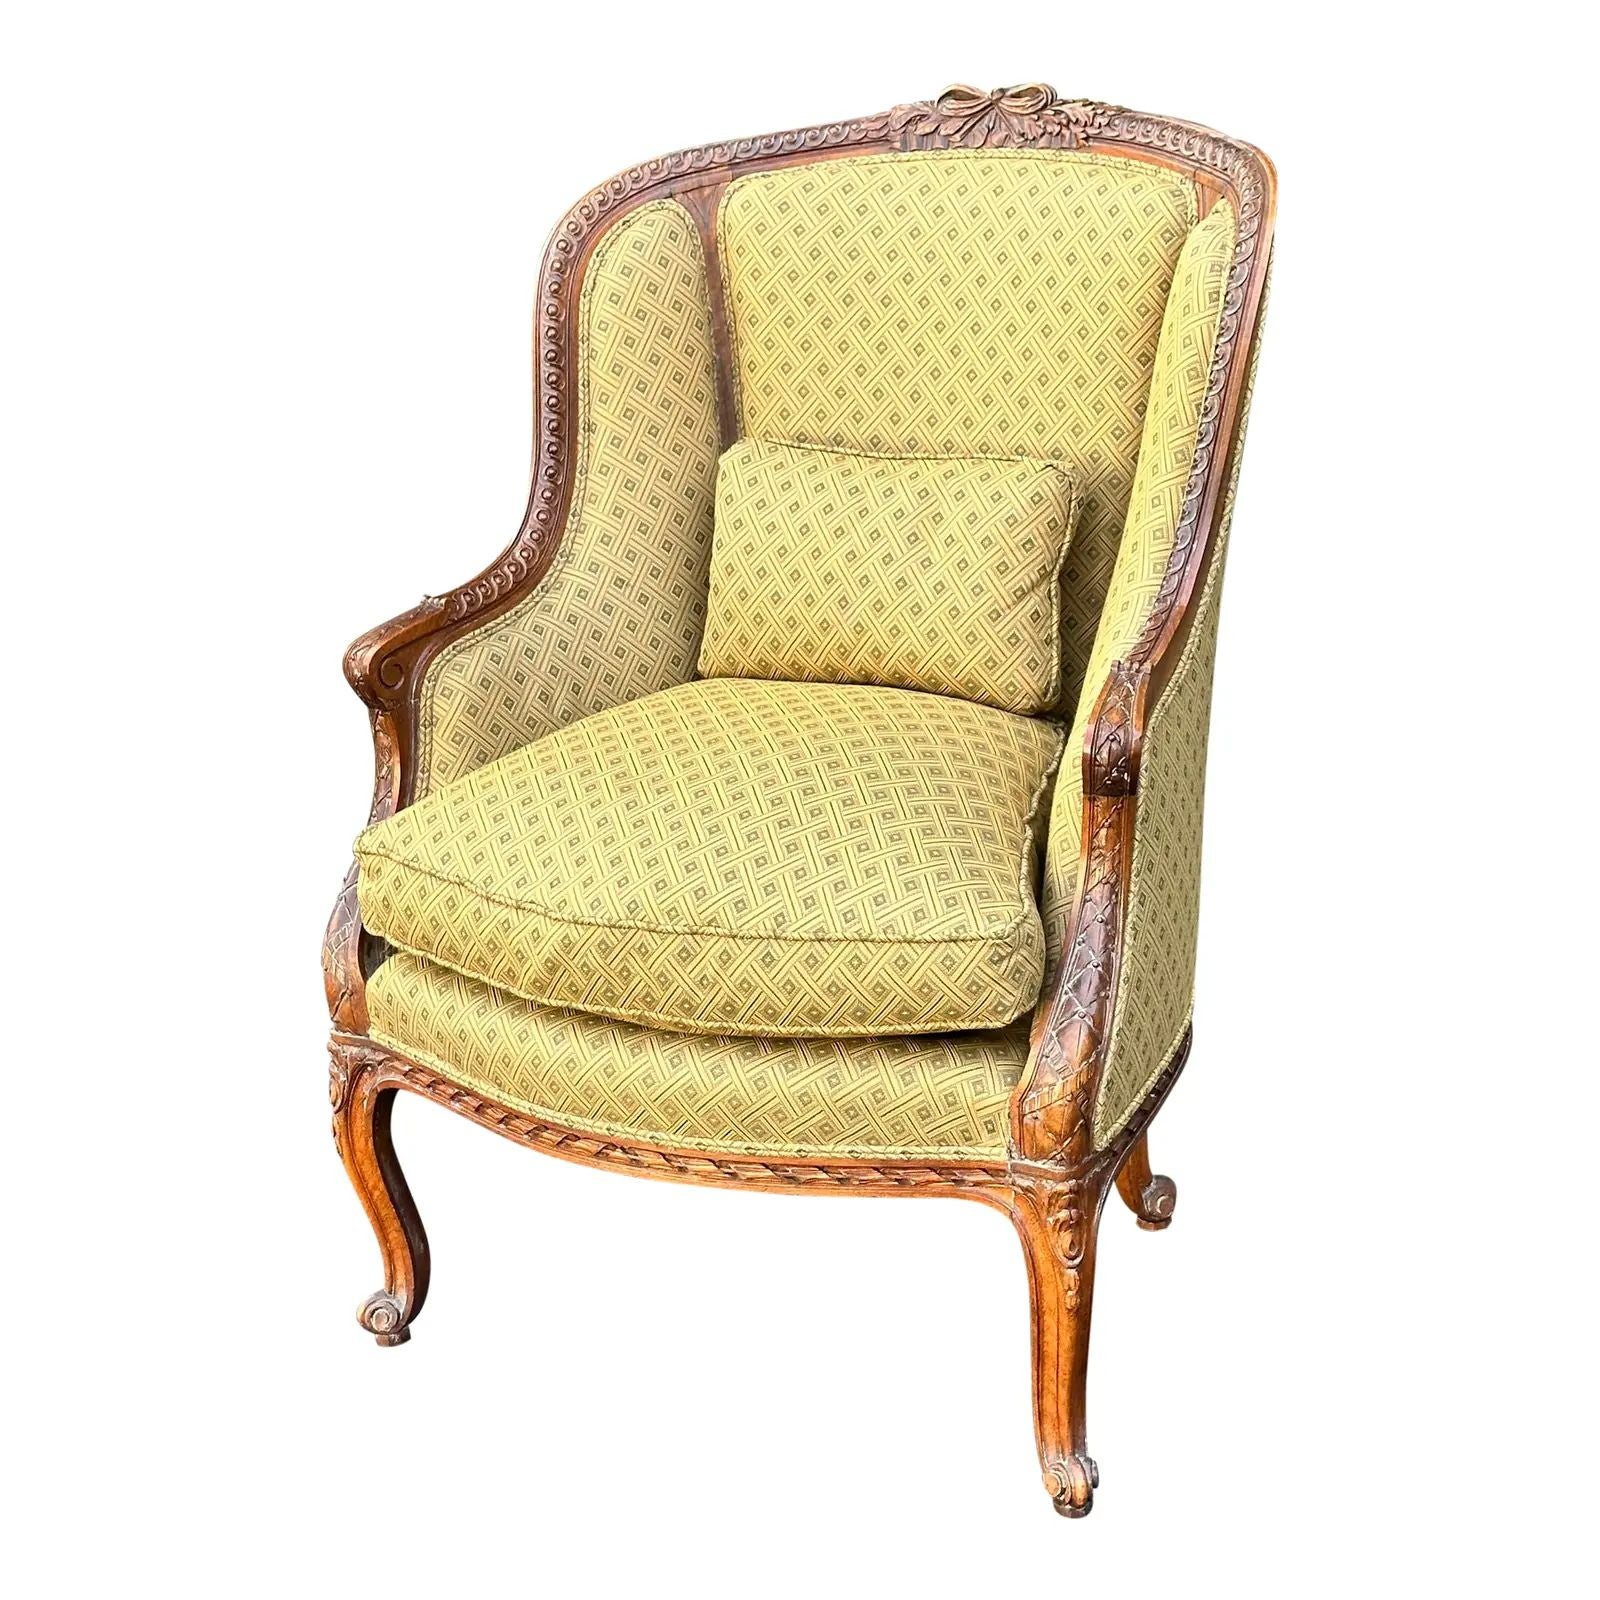 Antique French Fruitwood Bergere armchair, 19th Century